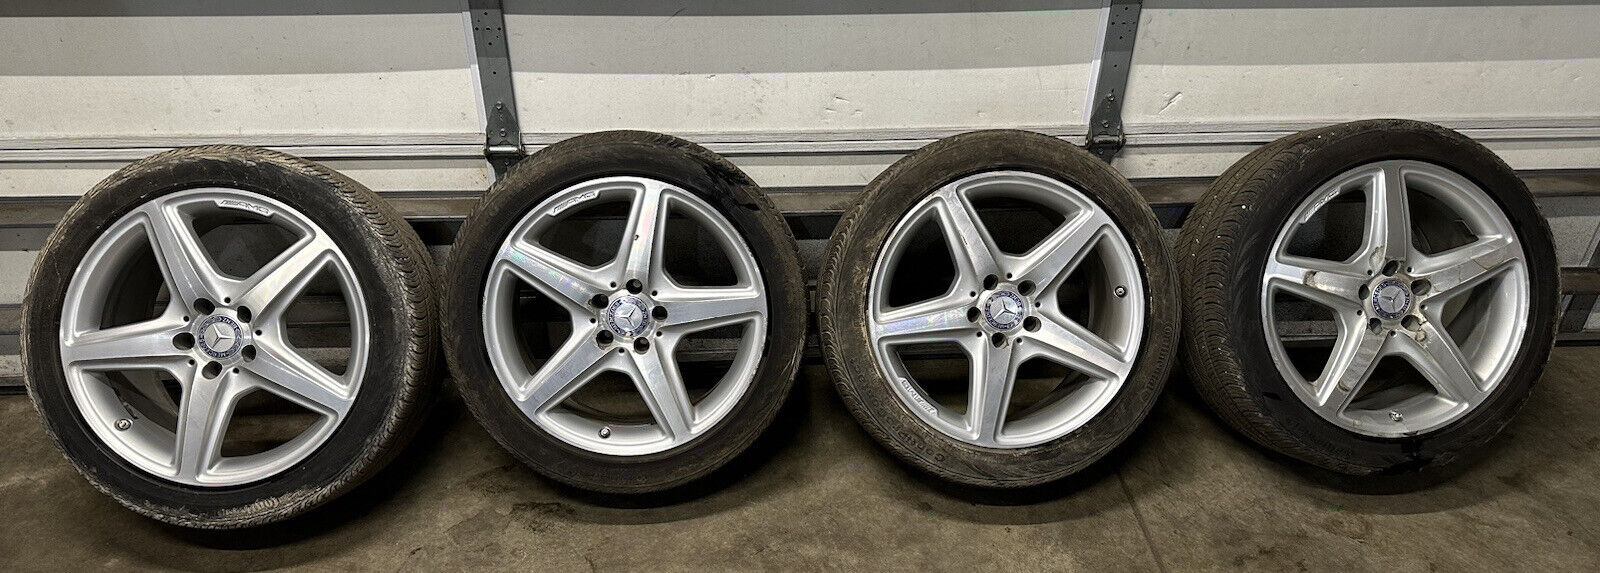 ✔MERCEDES W218 CLS550 AMG WHEEL WHEELS TIRES STAGGERED SET 18\